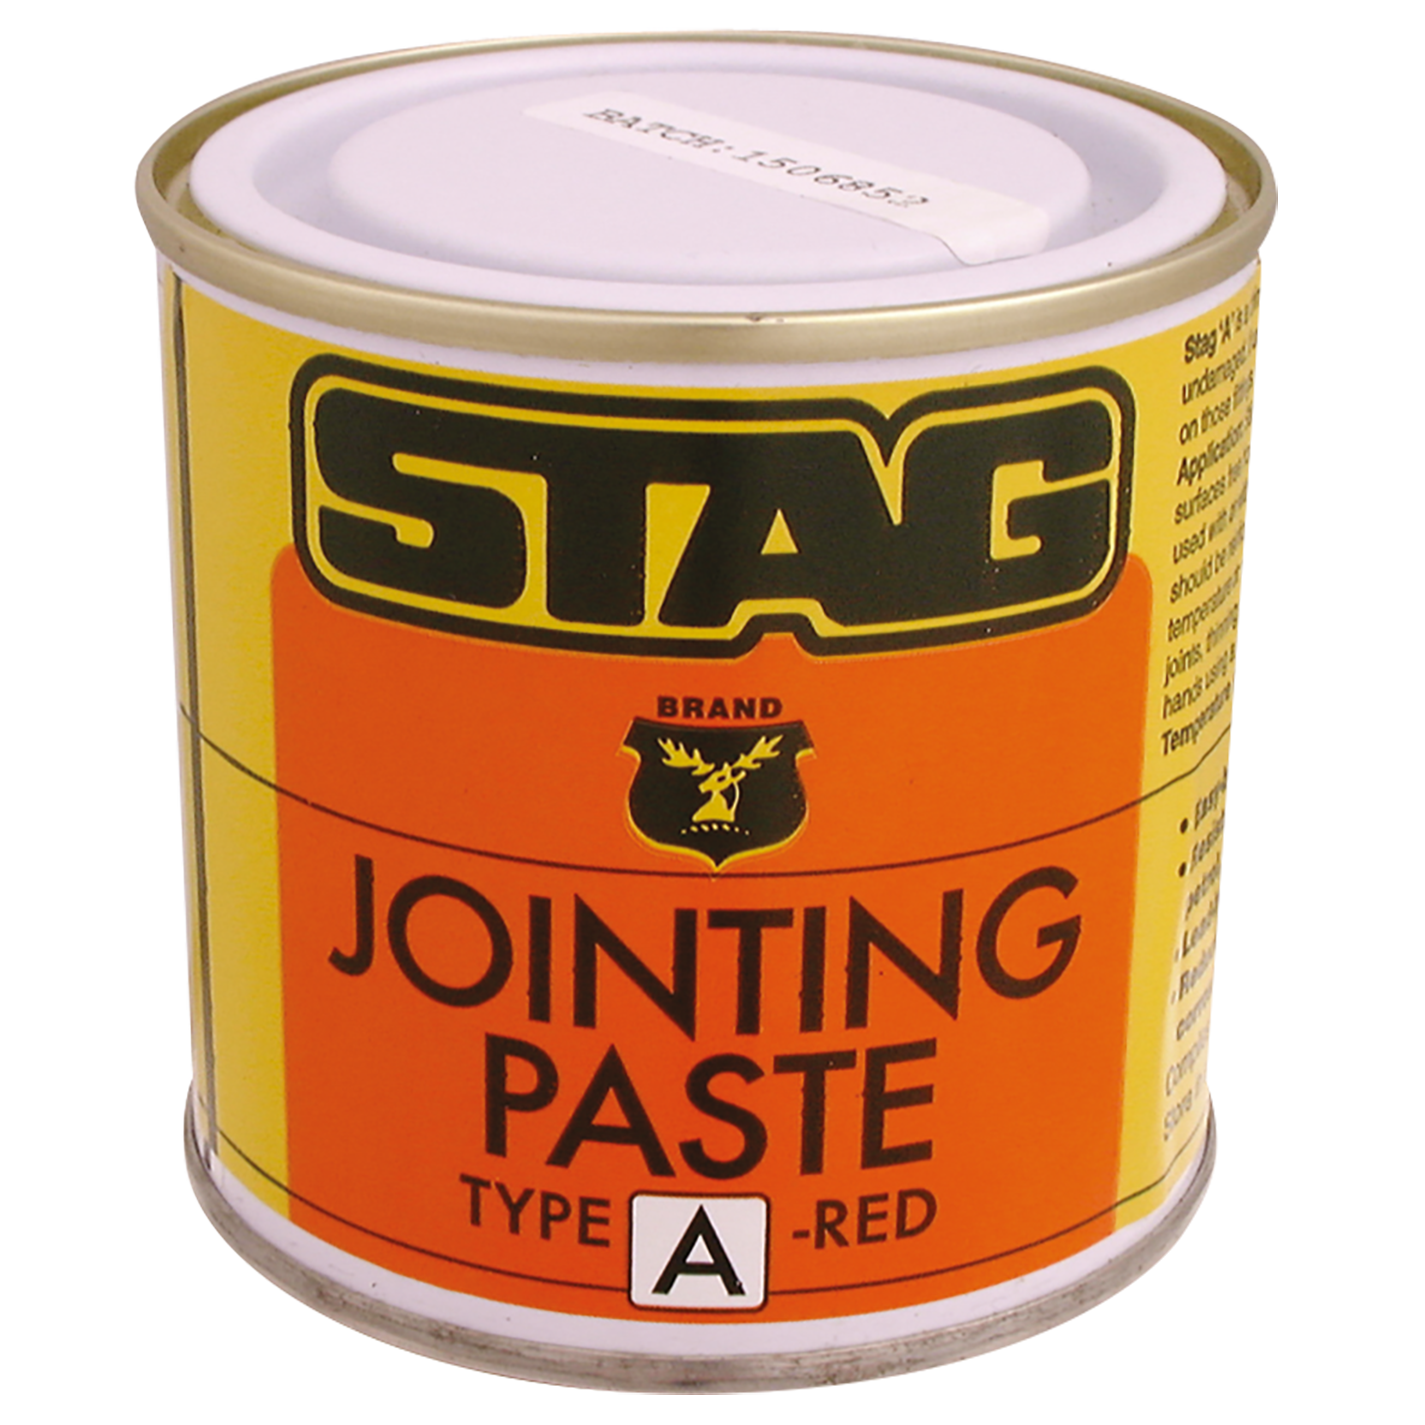 STAG A JOINTING PASTE 400GRM TIN